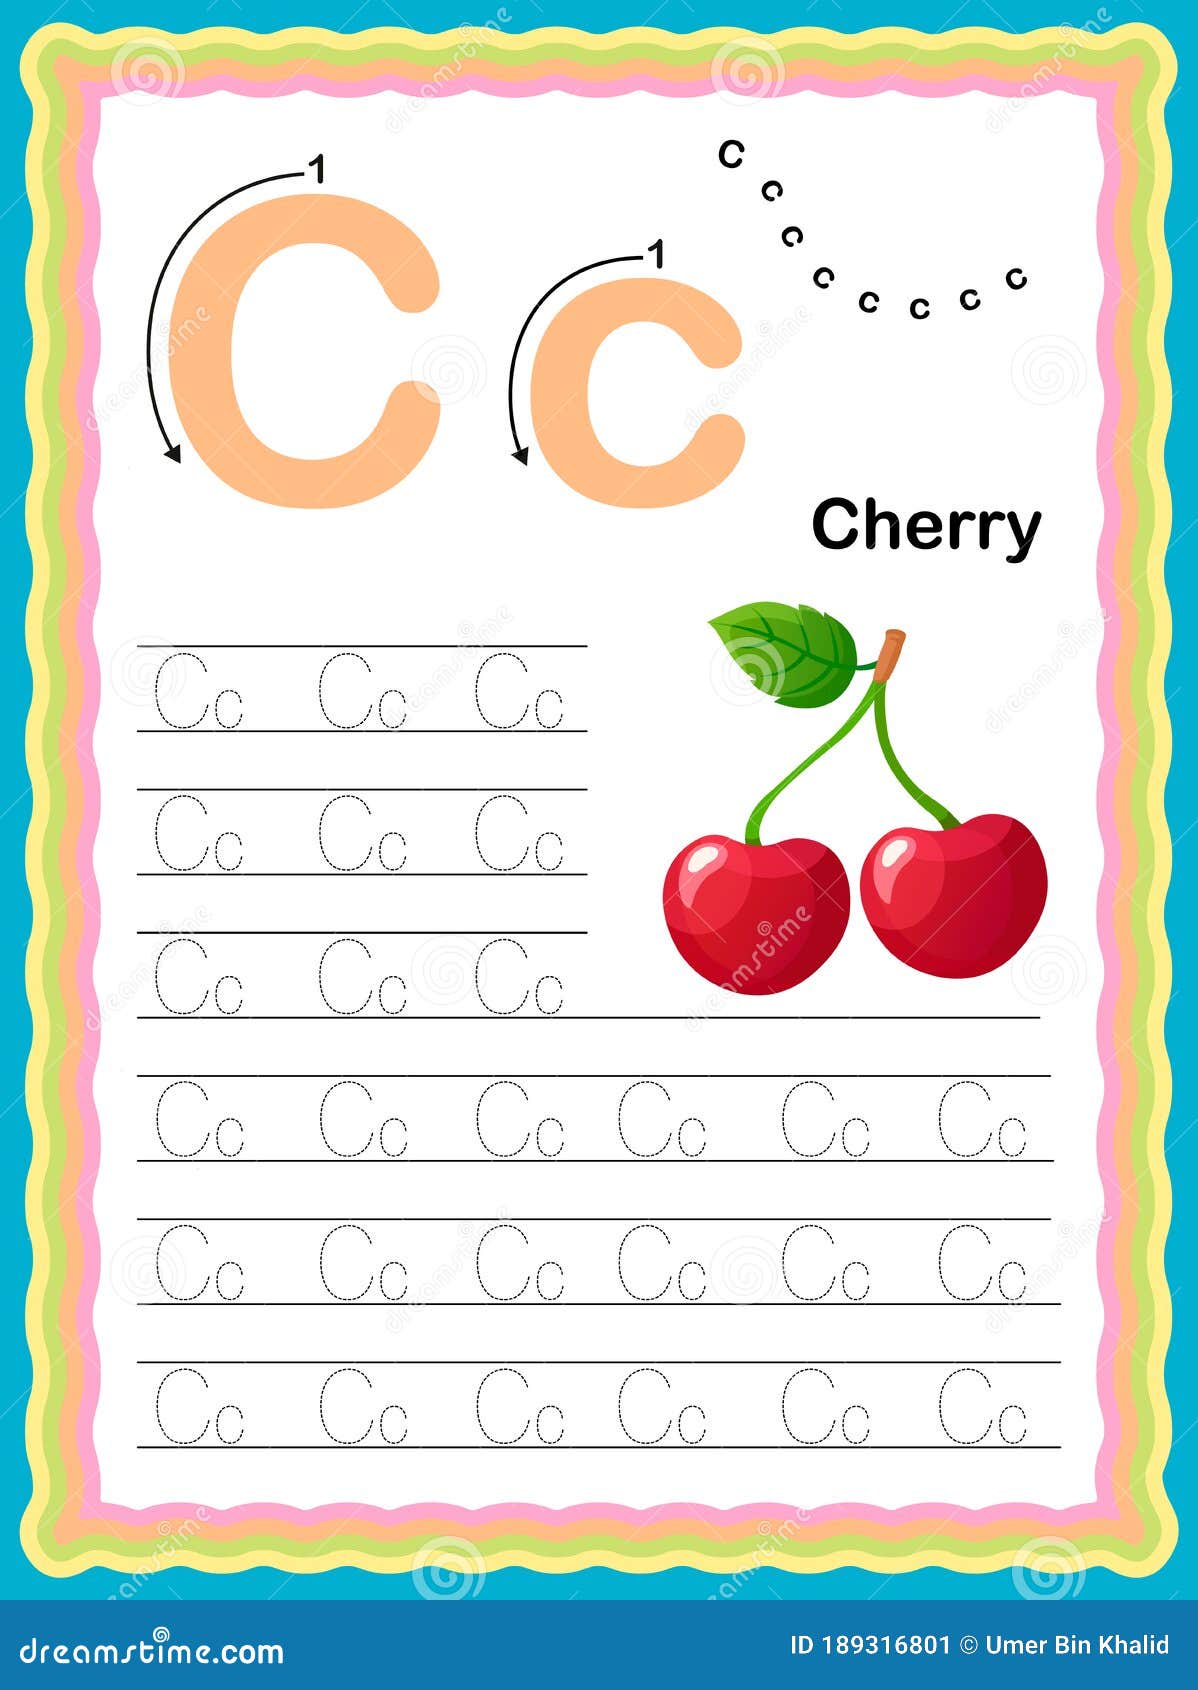 Colorful Letter C Uppercase And Lowercase Tracing Alphabets Start With Vegetables And Fruits Daily Writing Practice Worksheet Stock Vector Illustration Of Draw Cherry